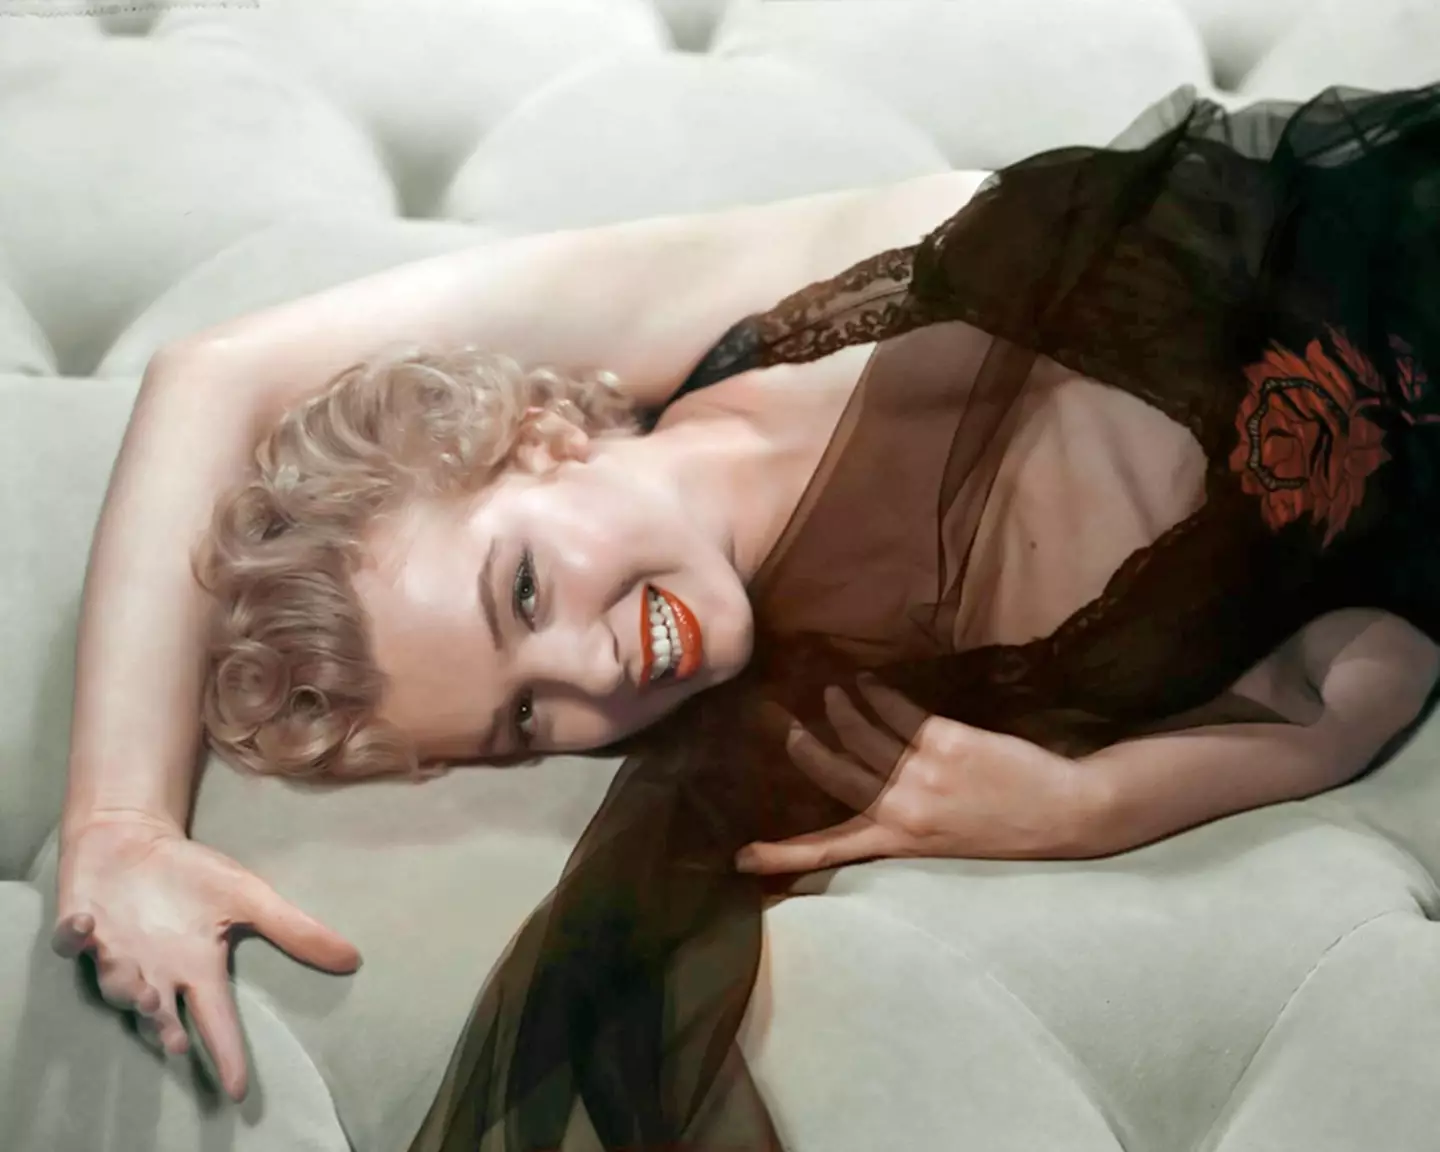 Marilyn Monroe's corpse allegedly went missing for a time.